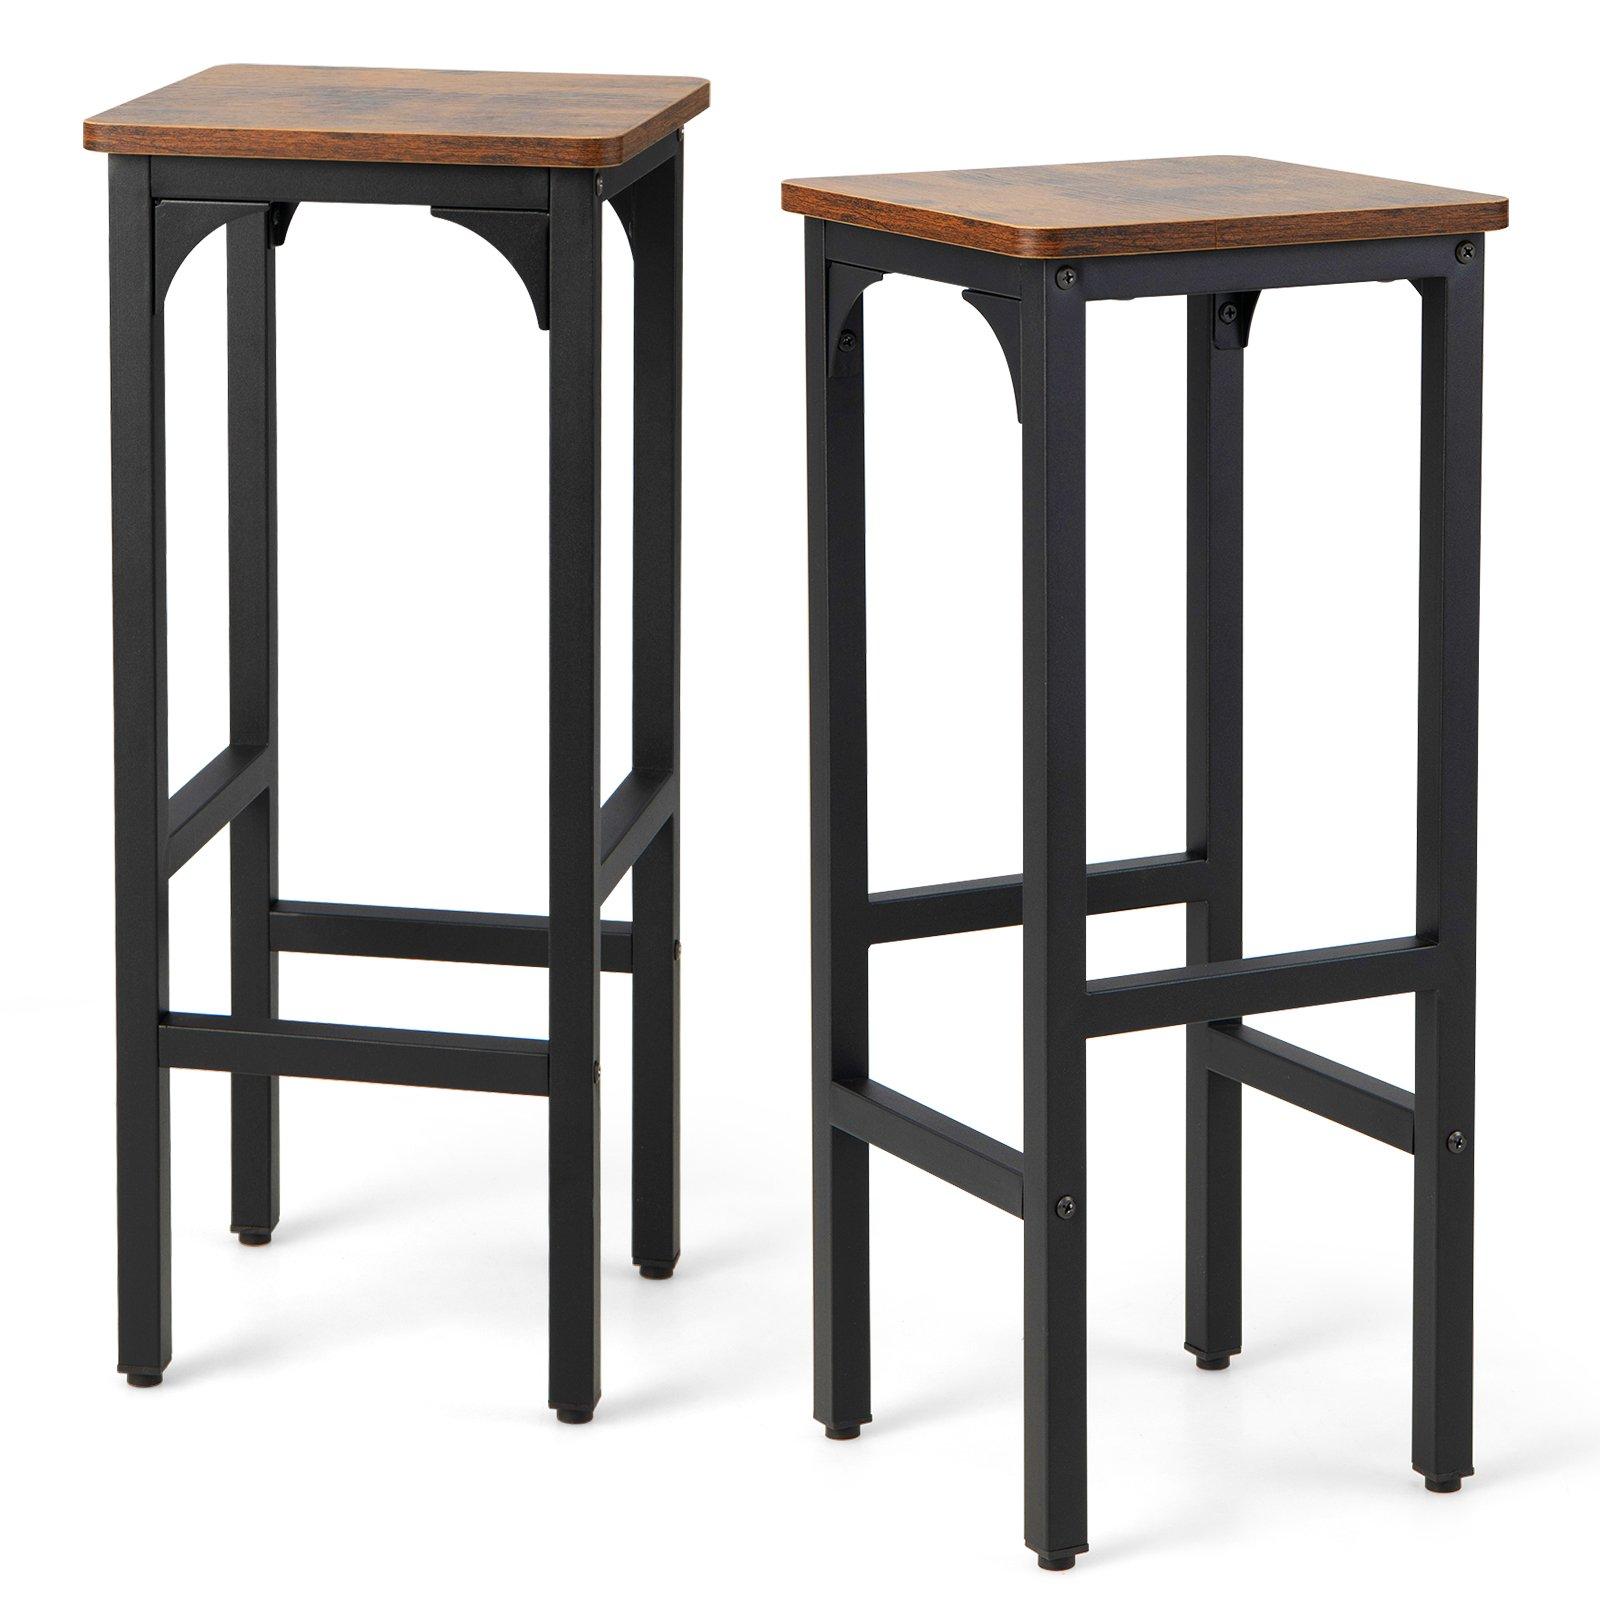 Costway Set of 2 Bar Stools Industrial Dining Bar Chair Counter Height Kitchen Breakfast Stool